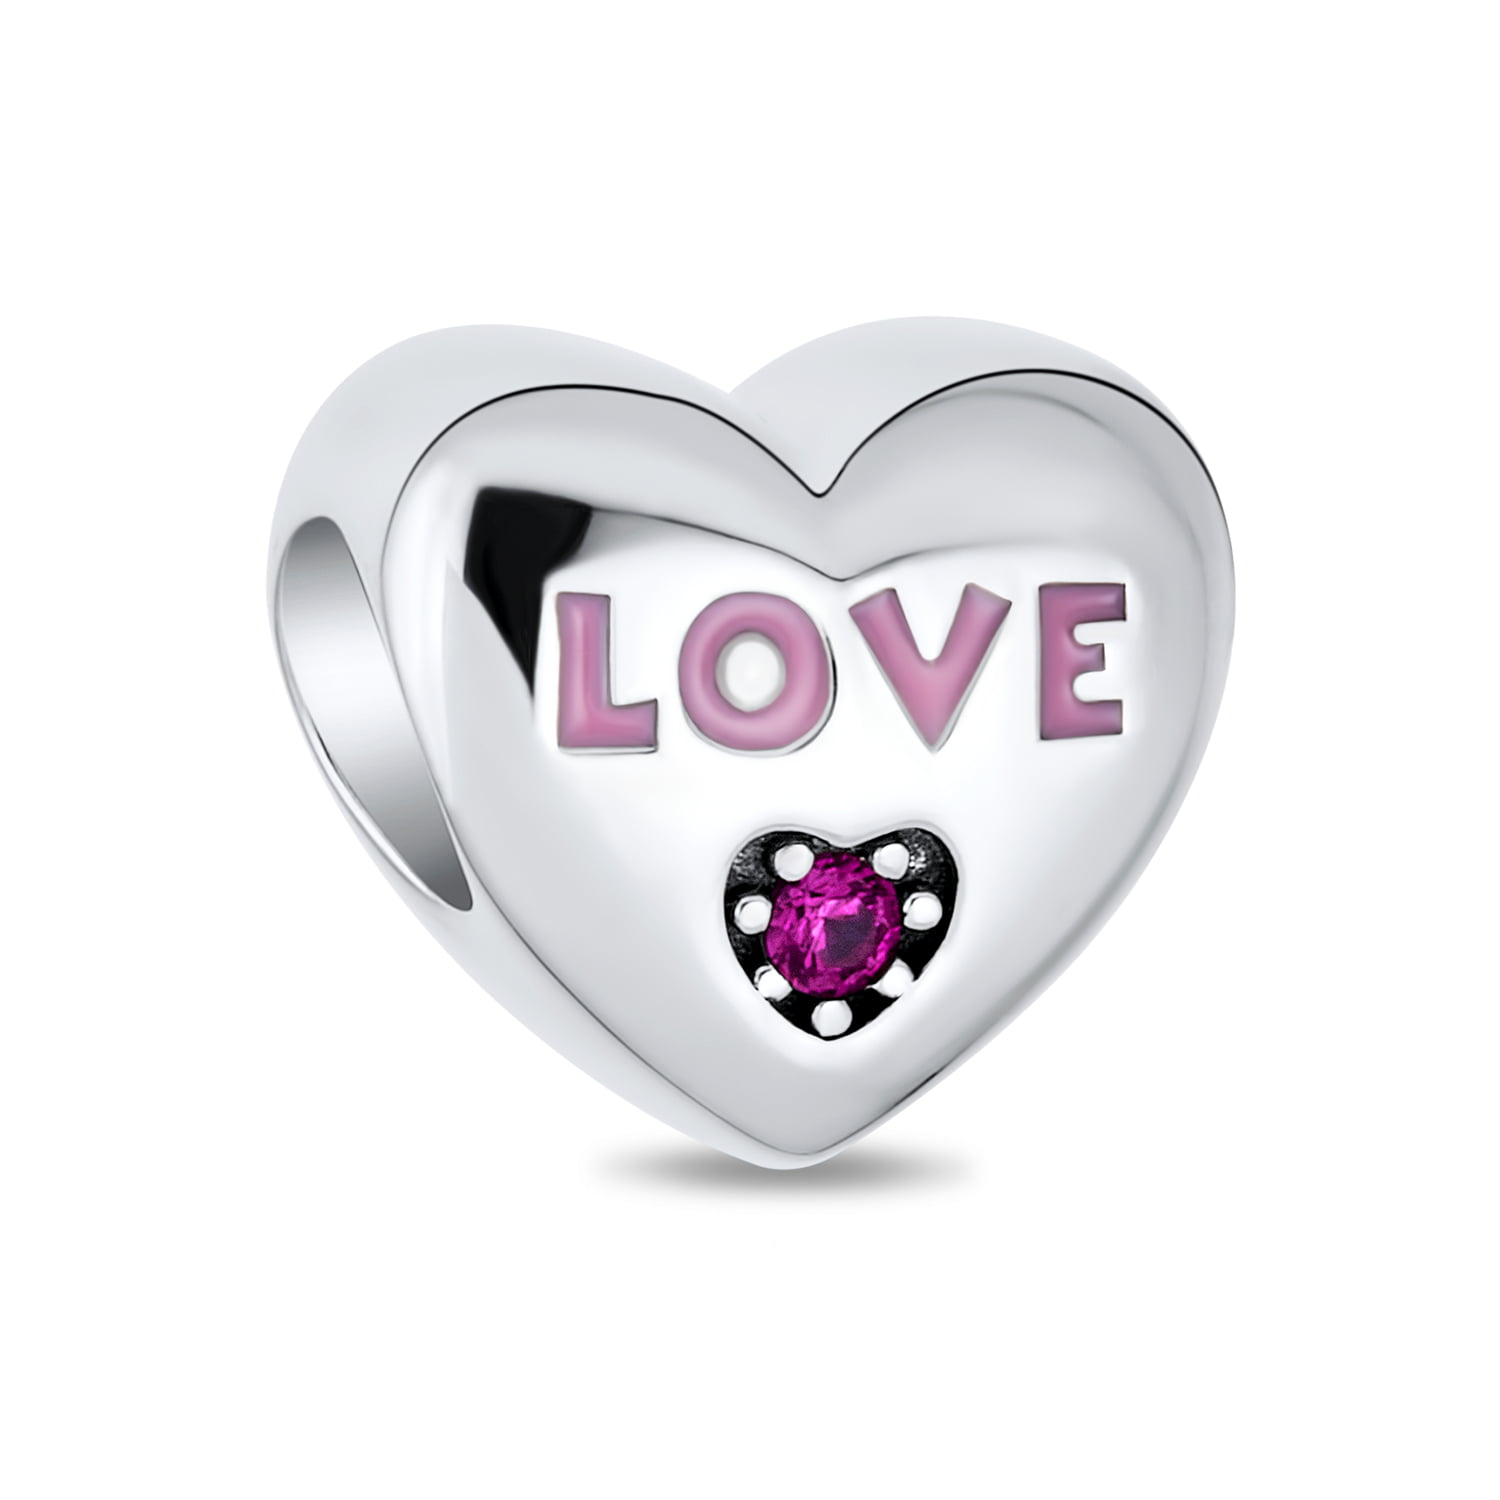 UNIQUEEN I Love You Beads Charms Pendant for Bracelets Necklaces